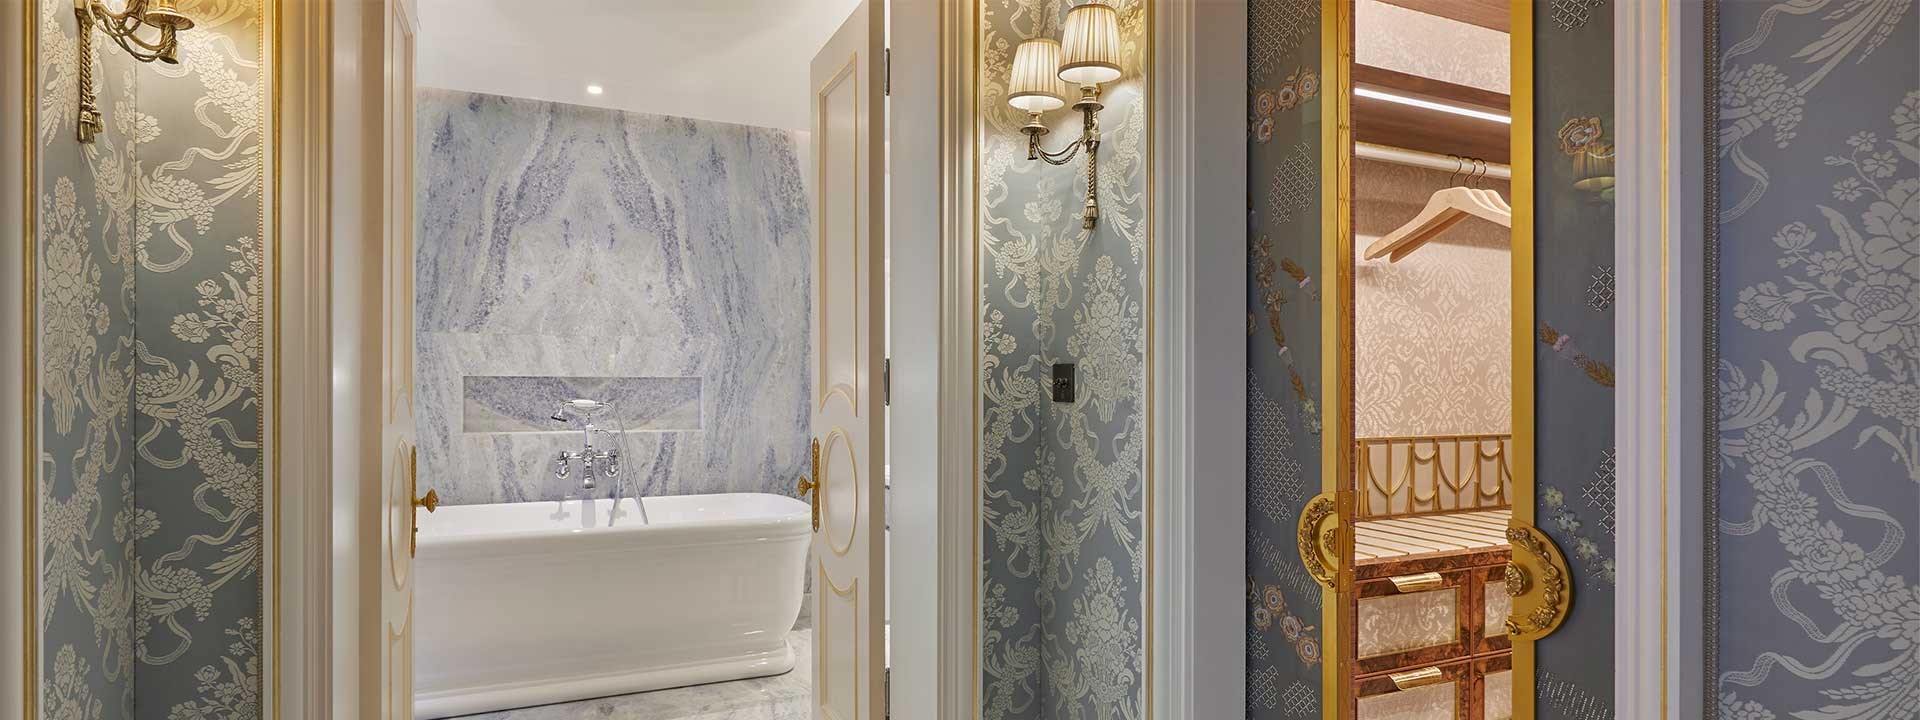 Royal Suite at Claridge's - bathroom view with pattern on the wall.